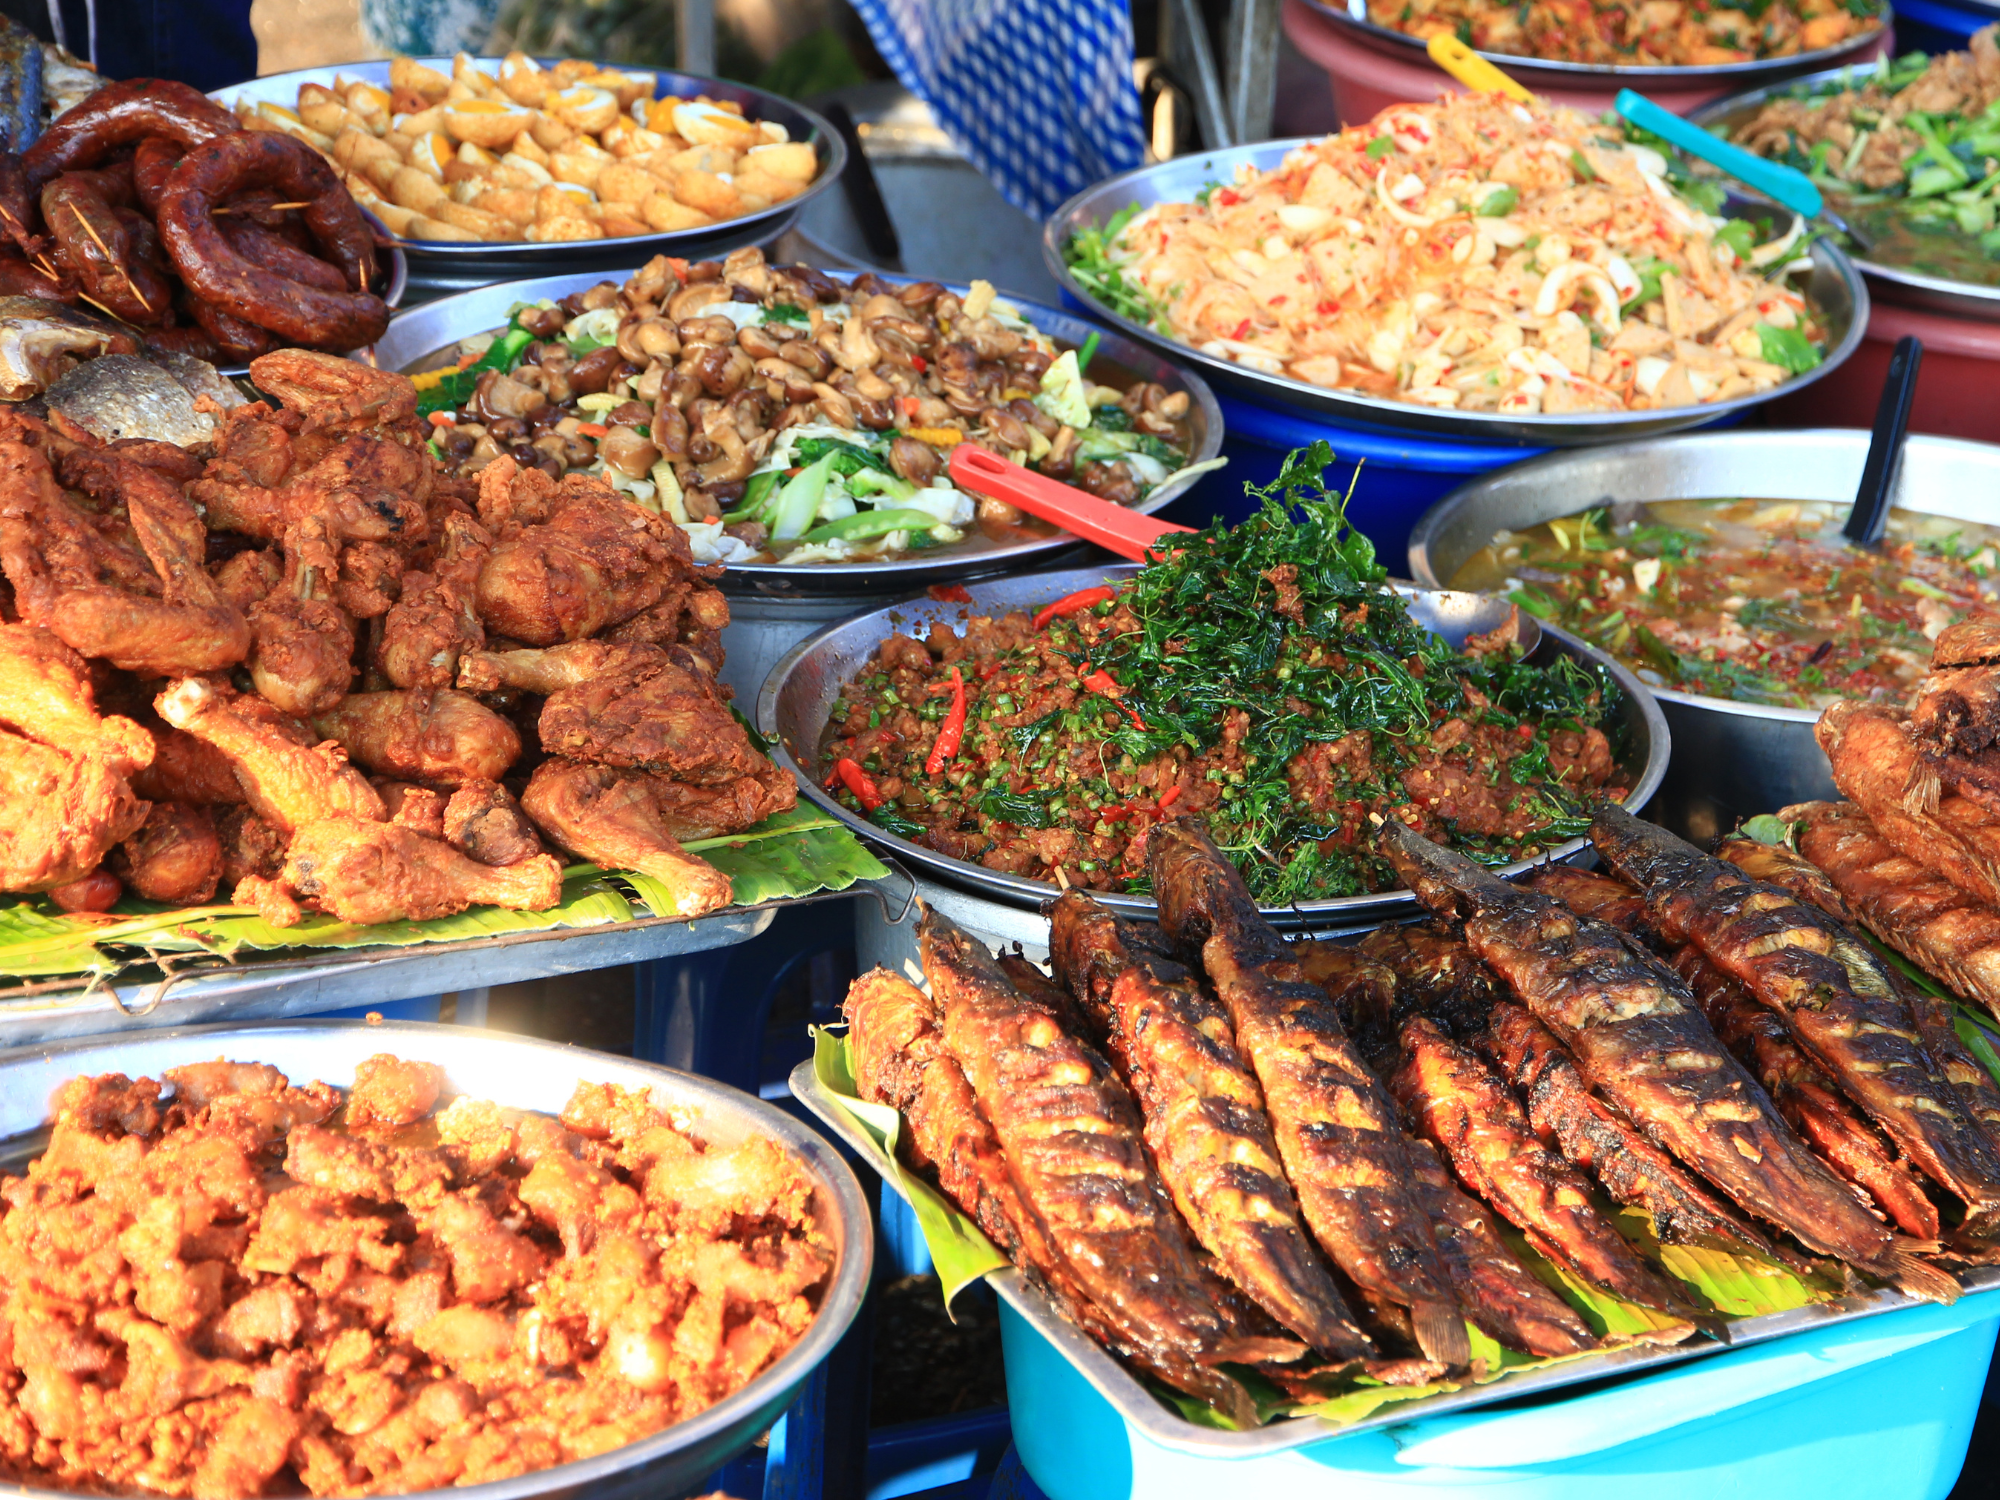 Things to do during your trip to Thailand from UAE - Sample street food in Chiang Mai